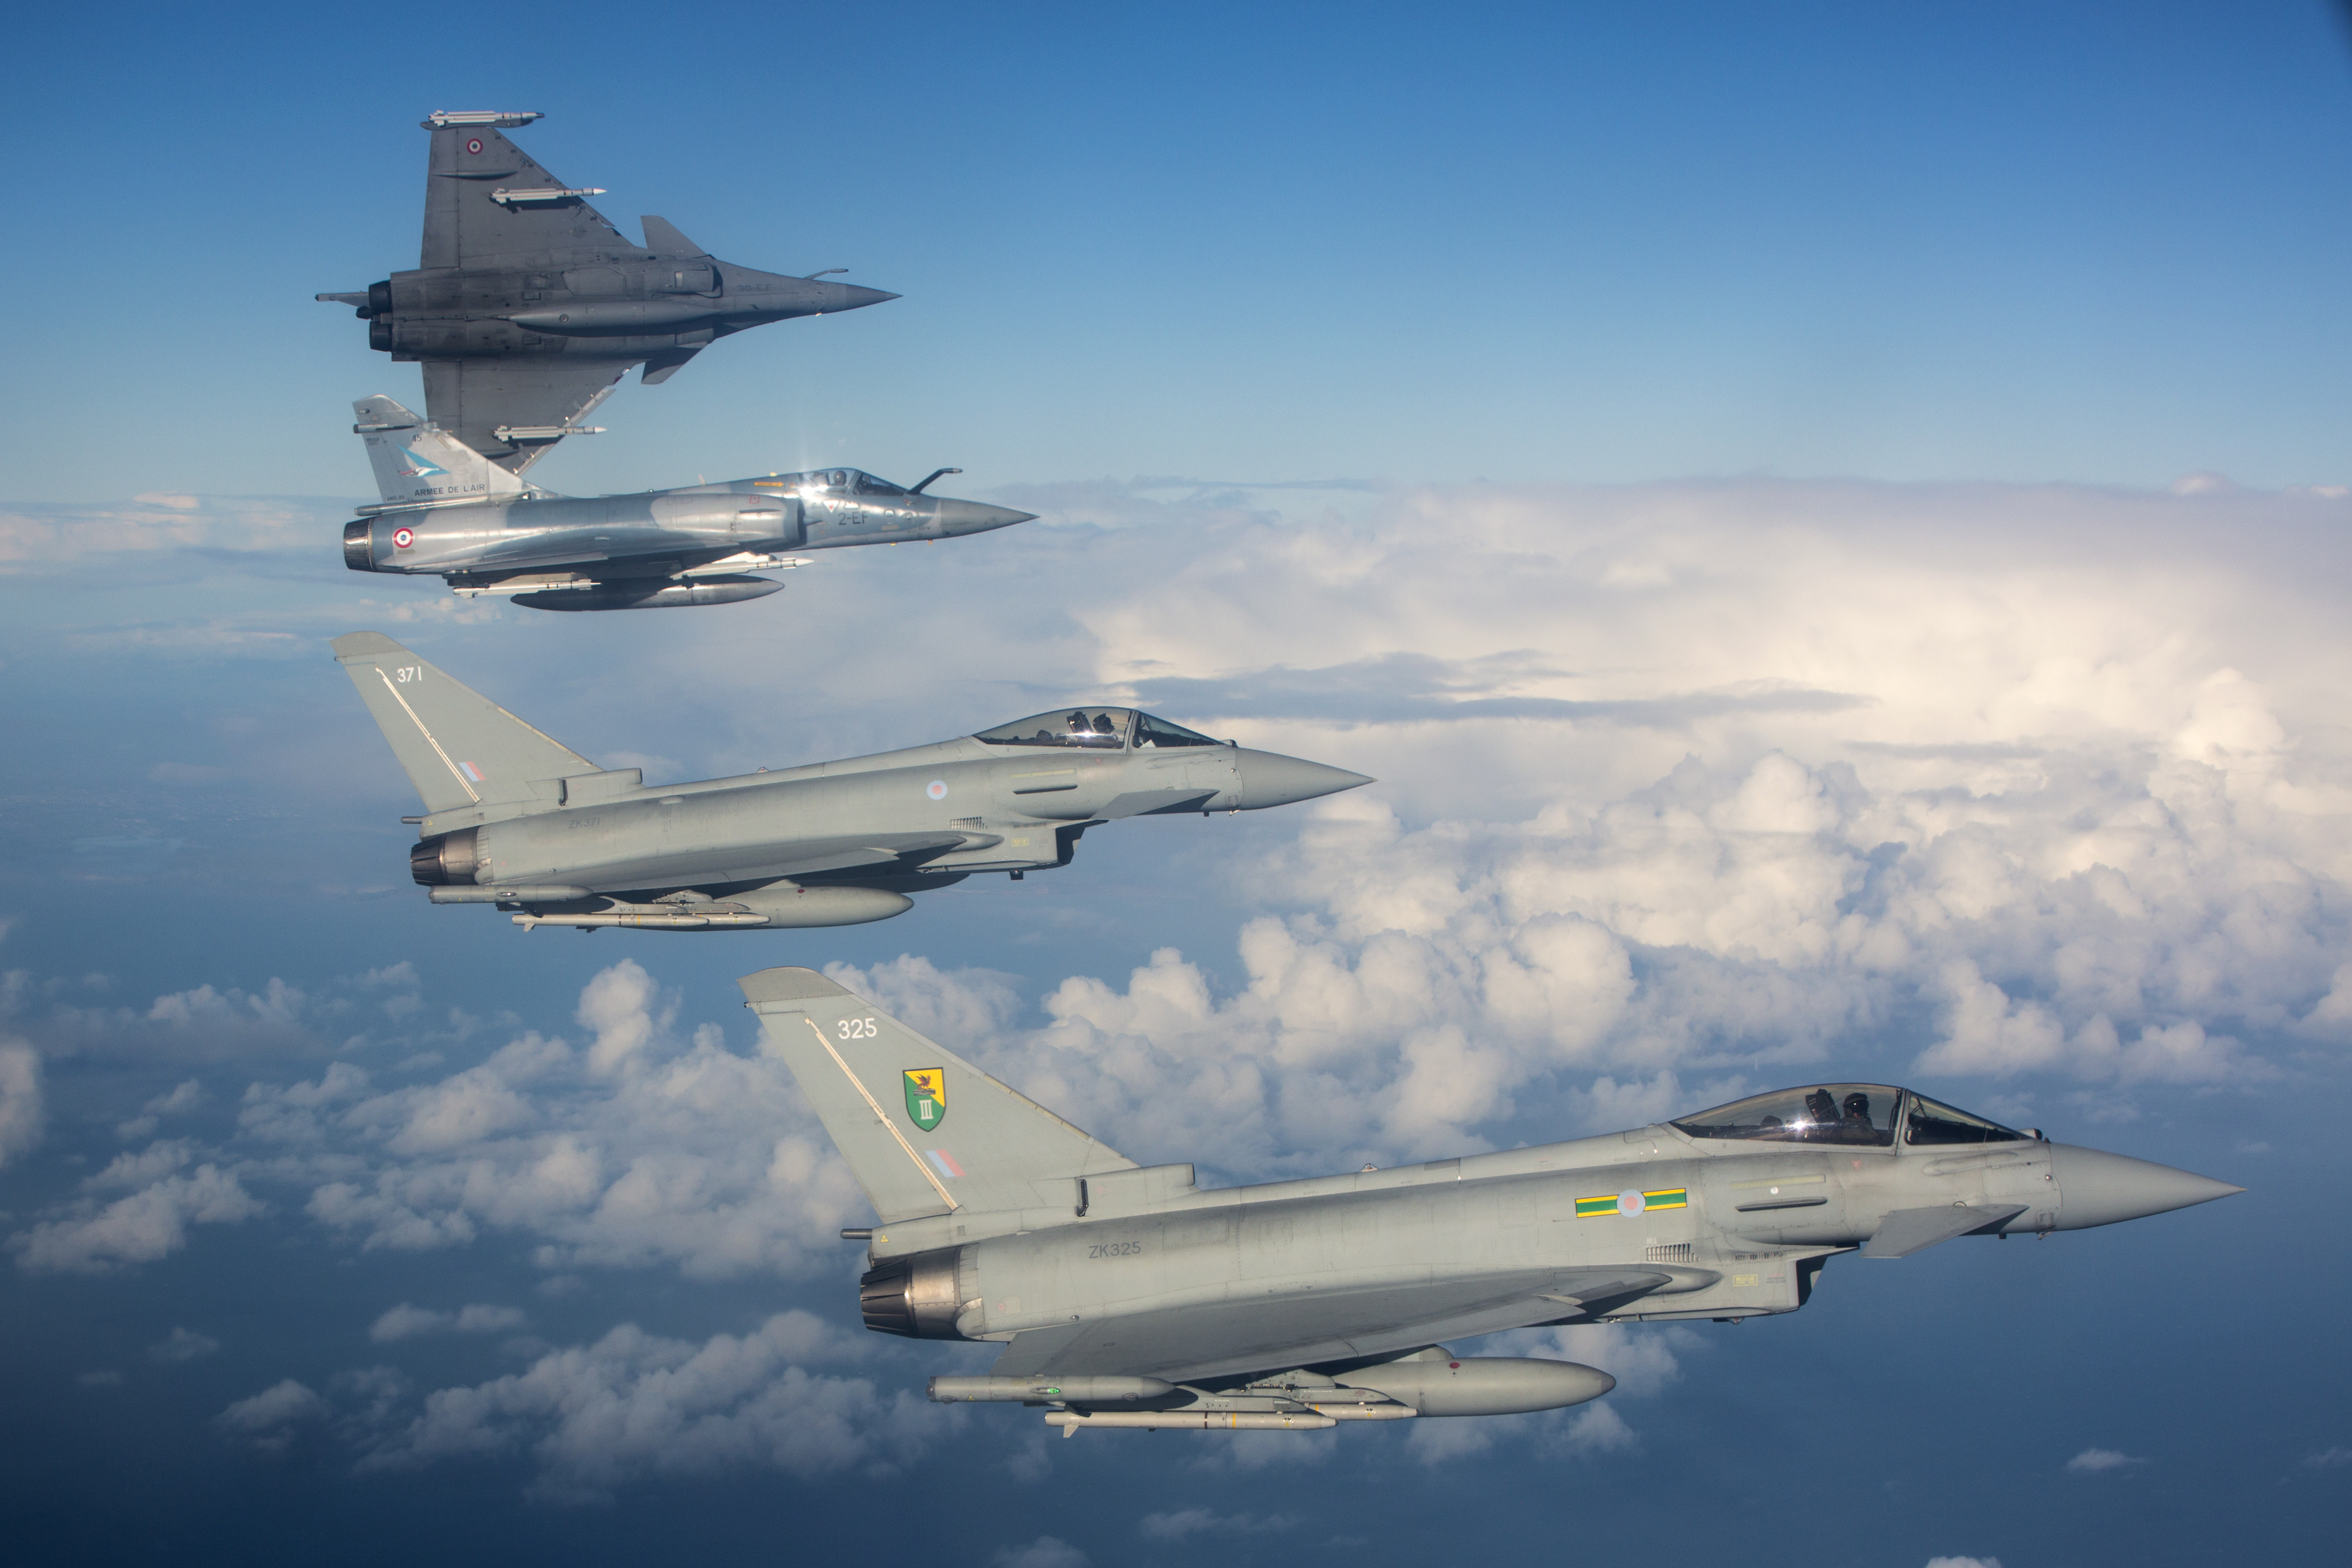 Typhoon and French aircraft in flight.